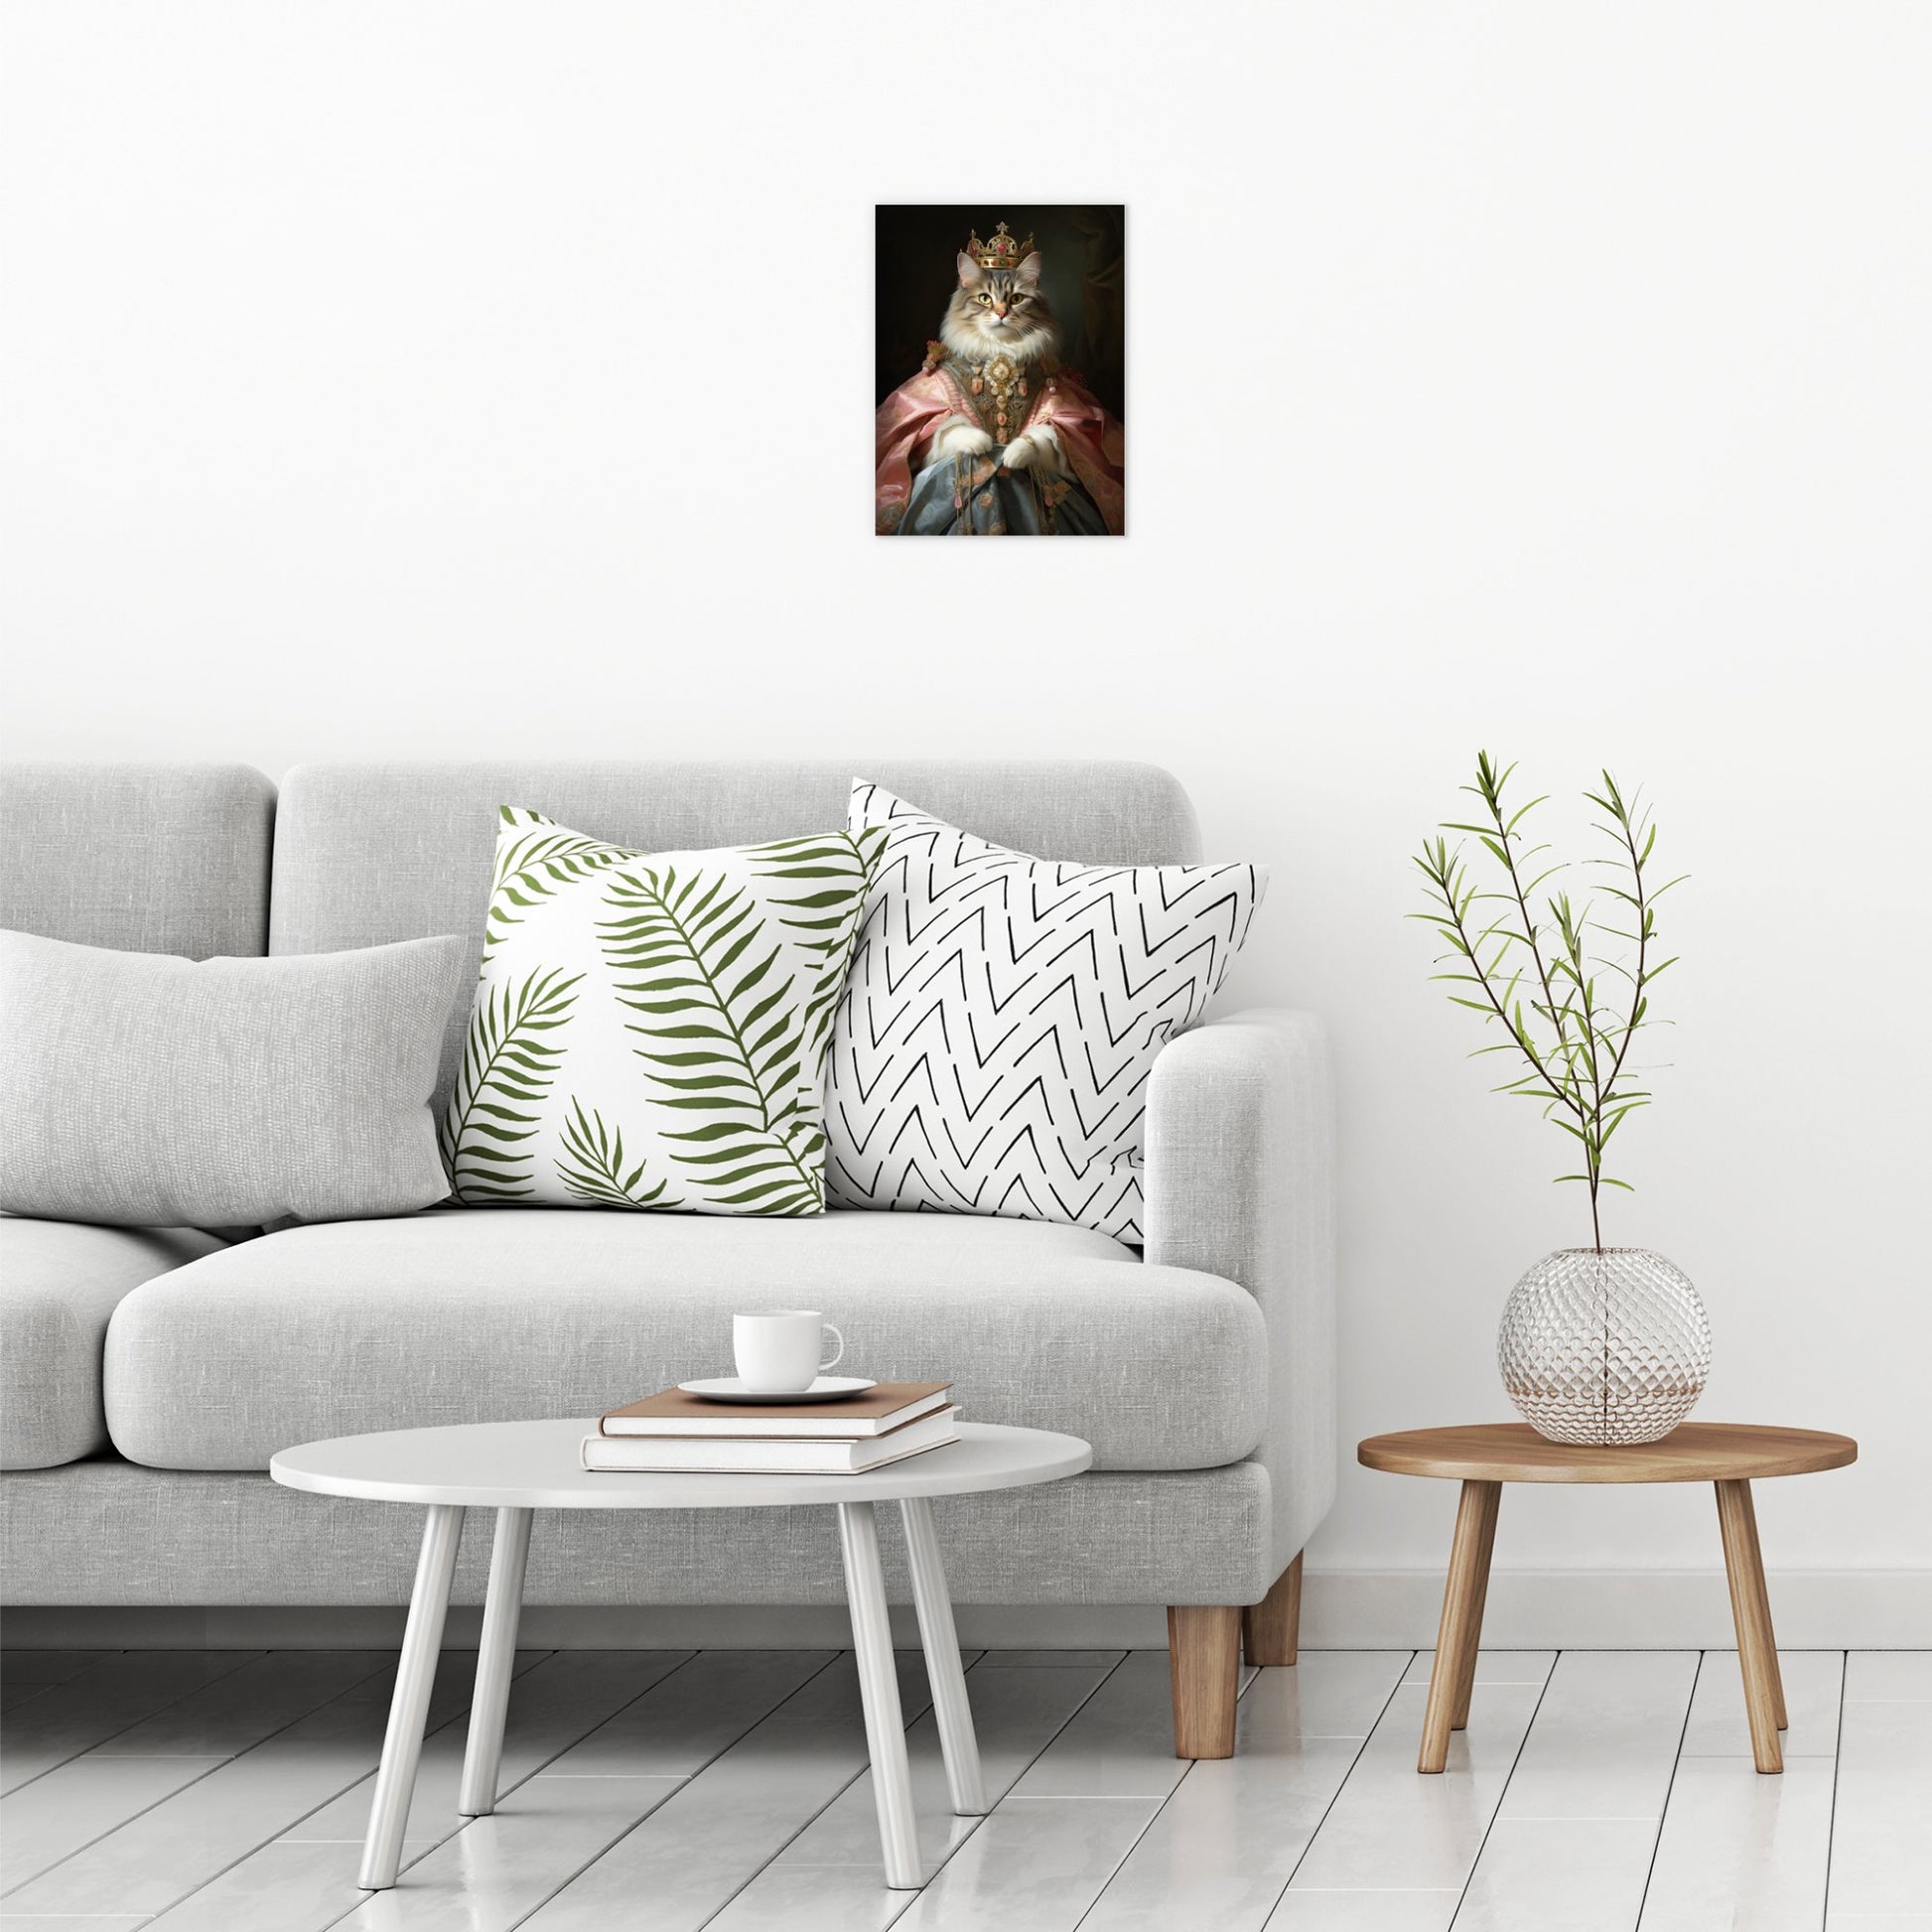 A contemporary modern room view showing a small size metal art poster display plate with printed design of a Pet Portraits - Princess Kitty Painting